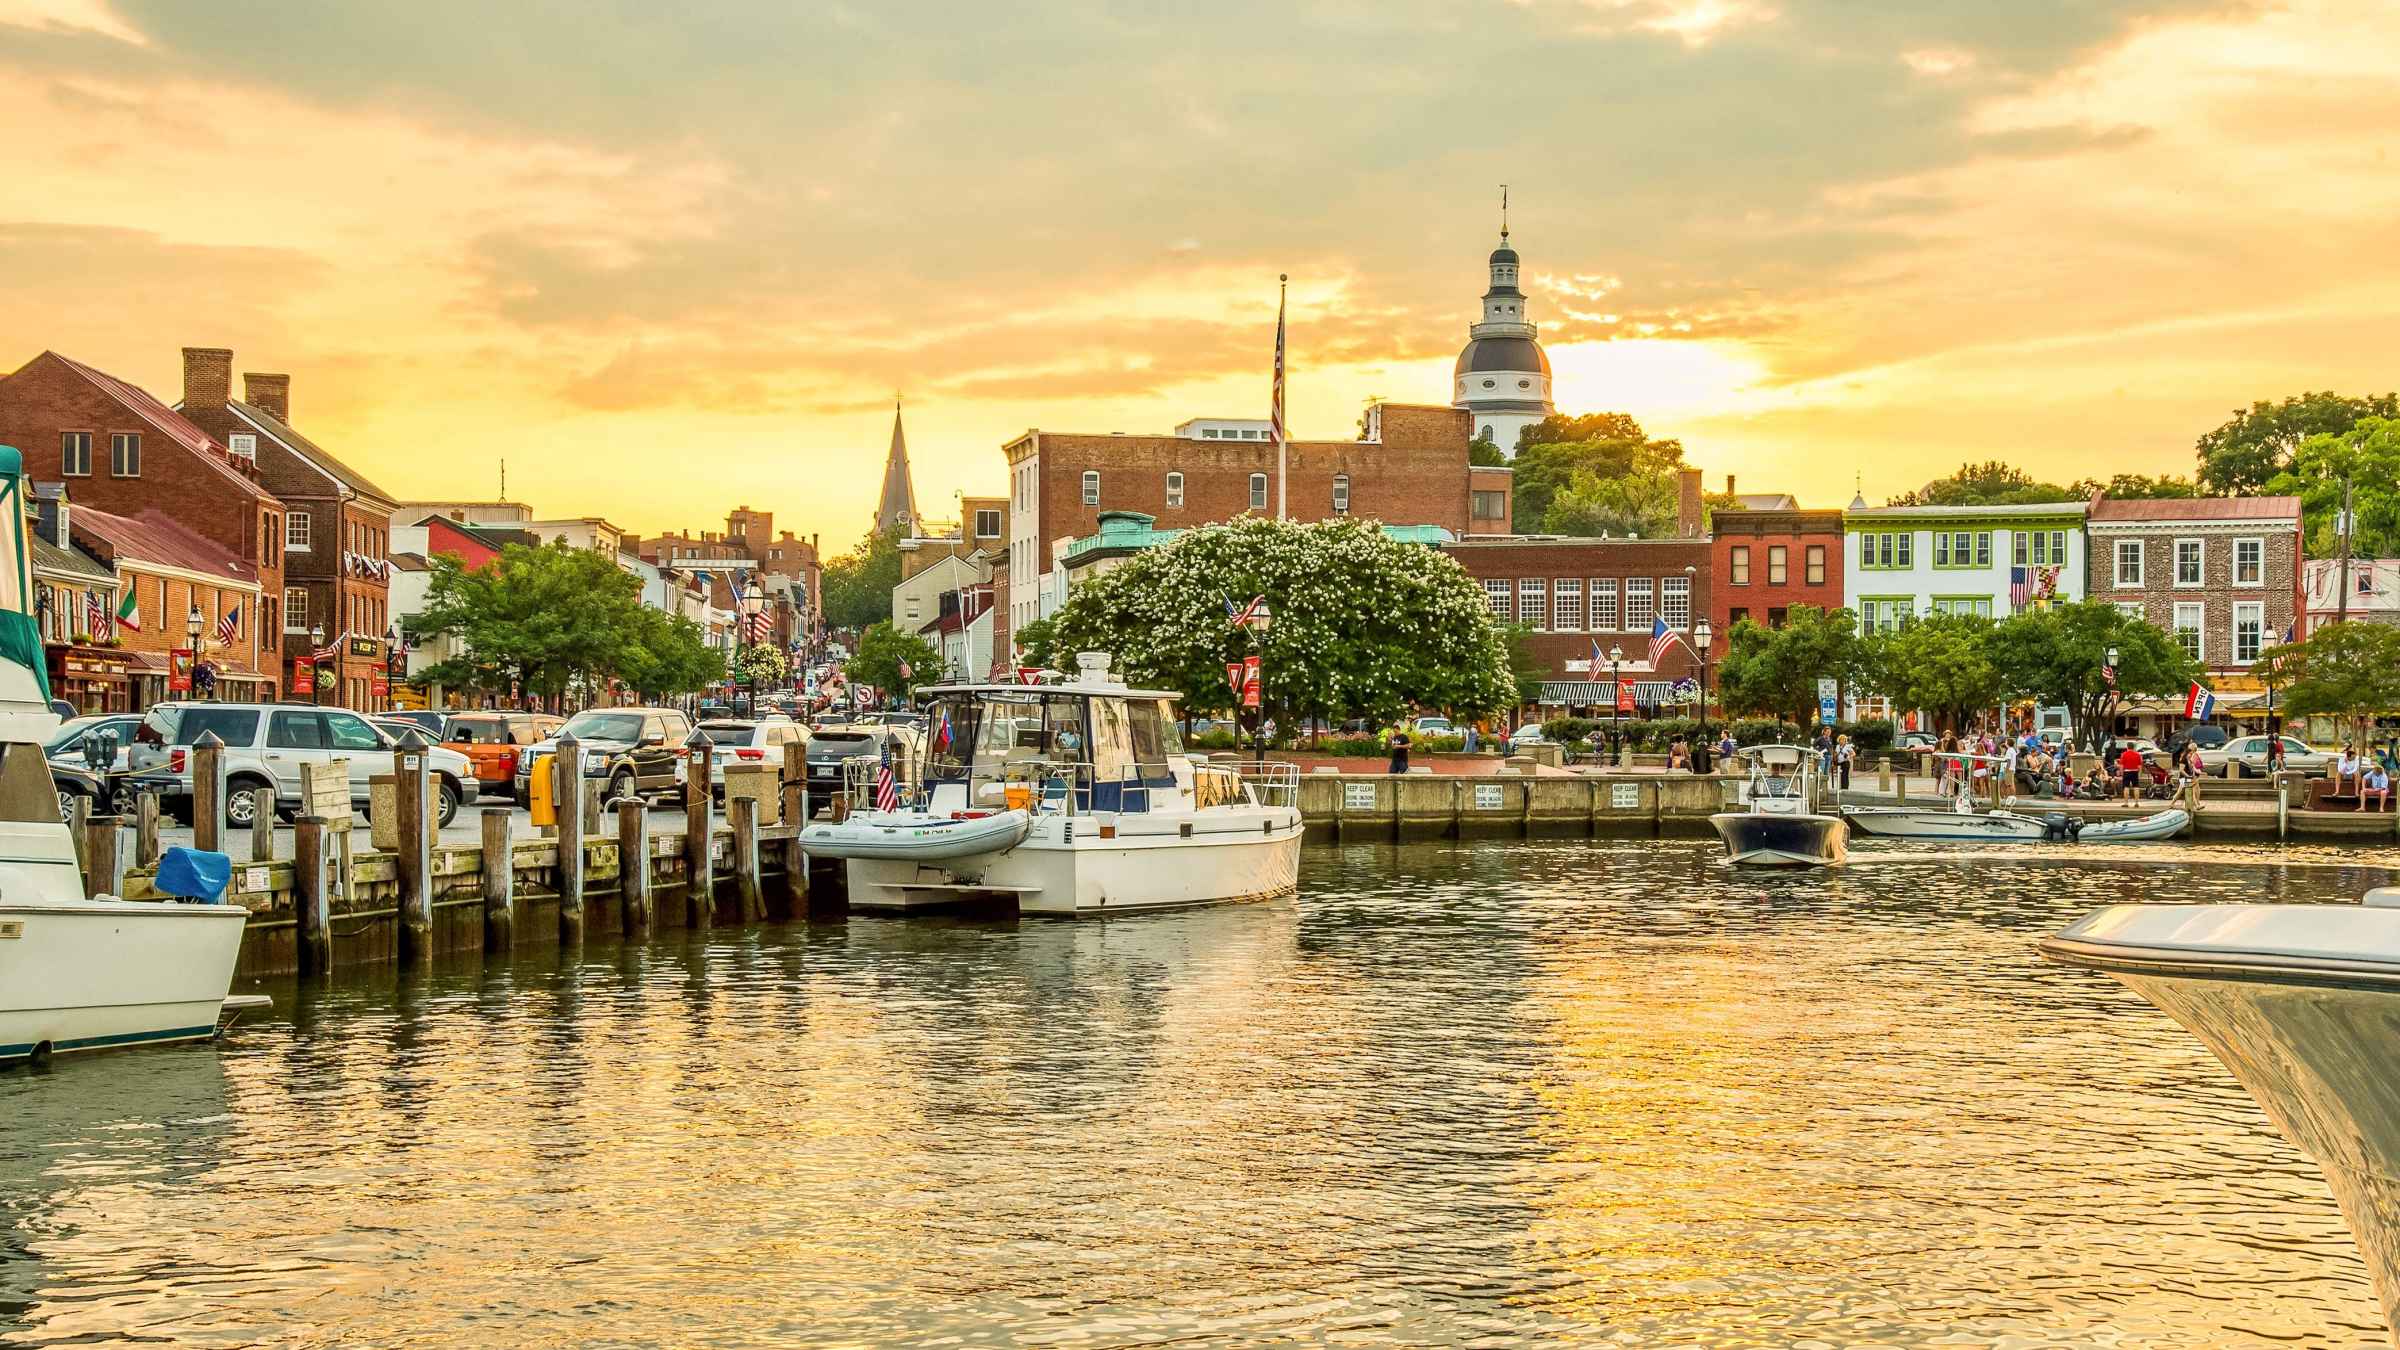 day trip ideas in maryland